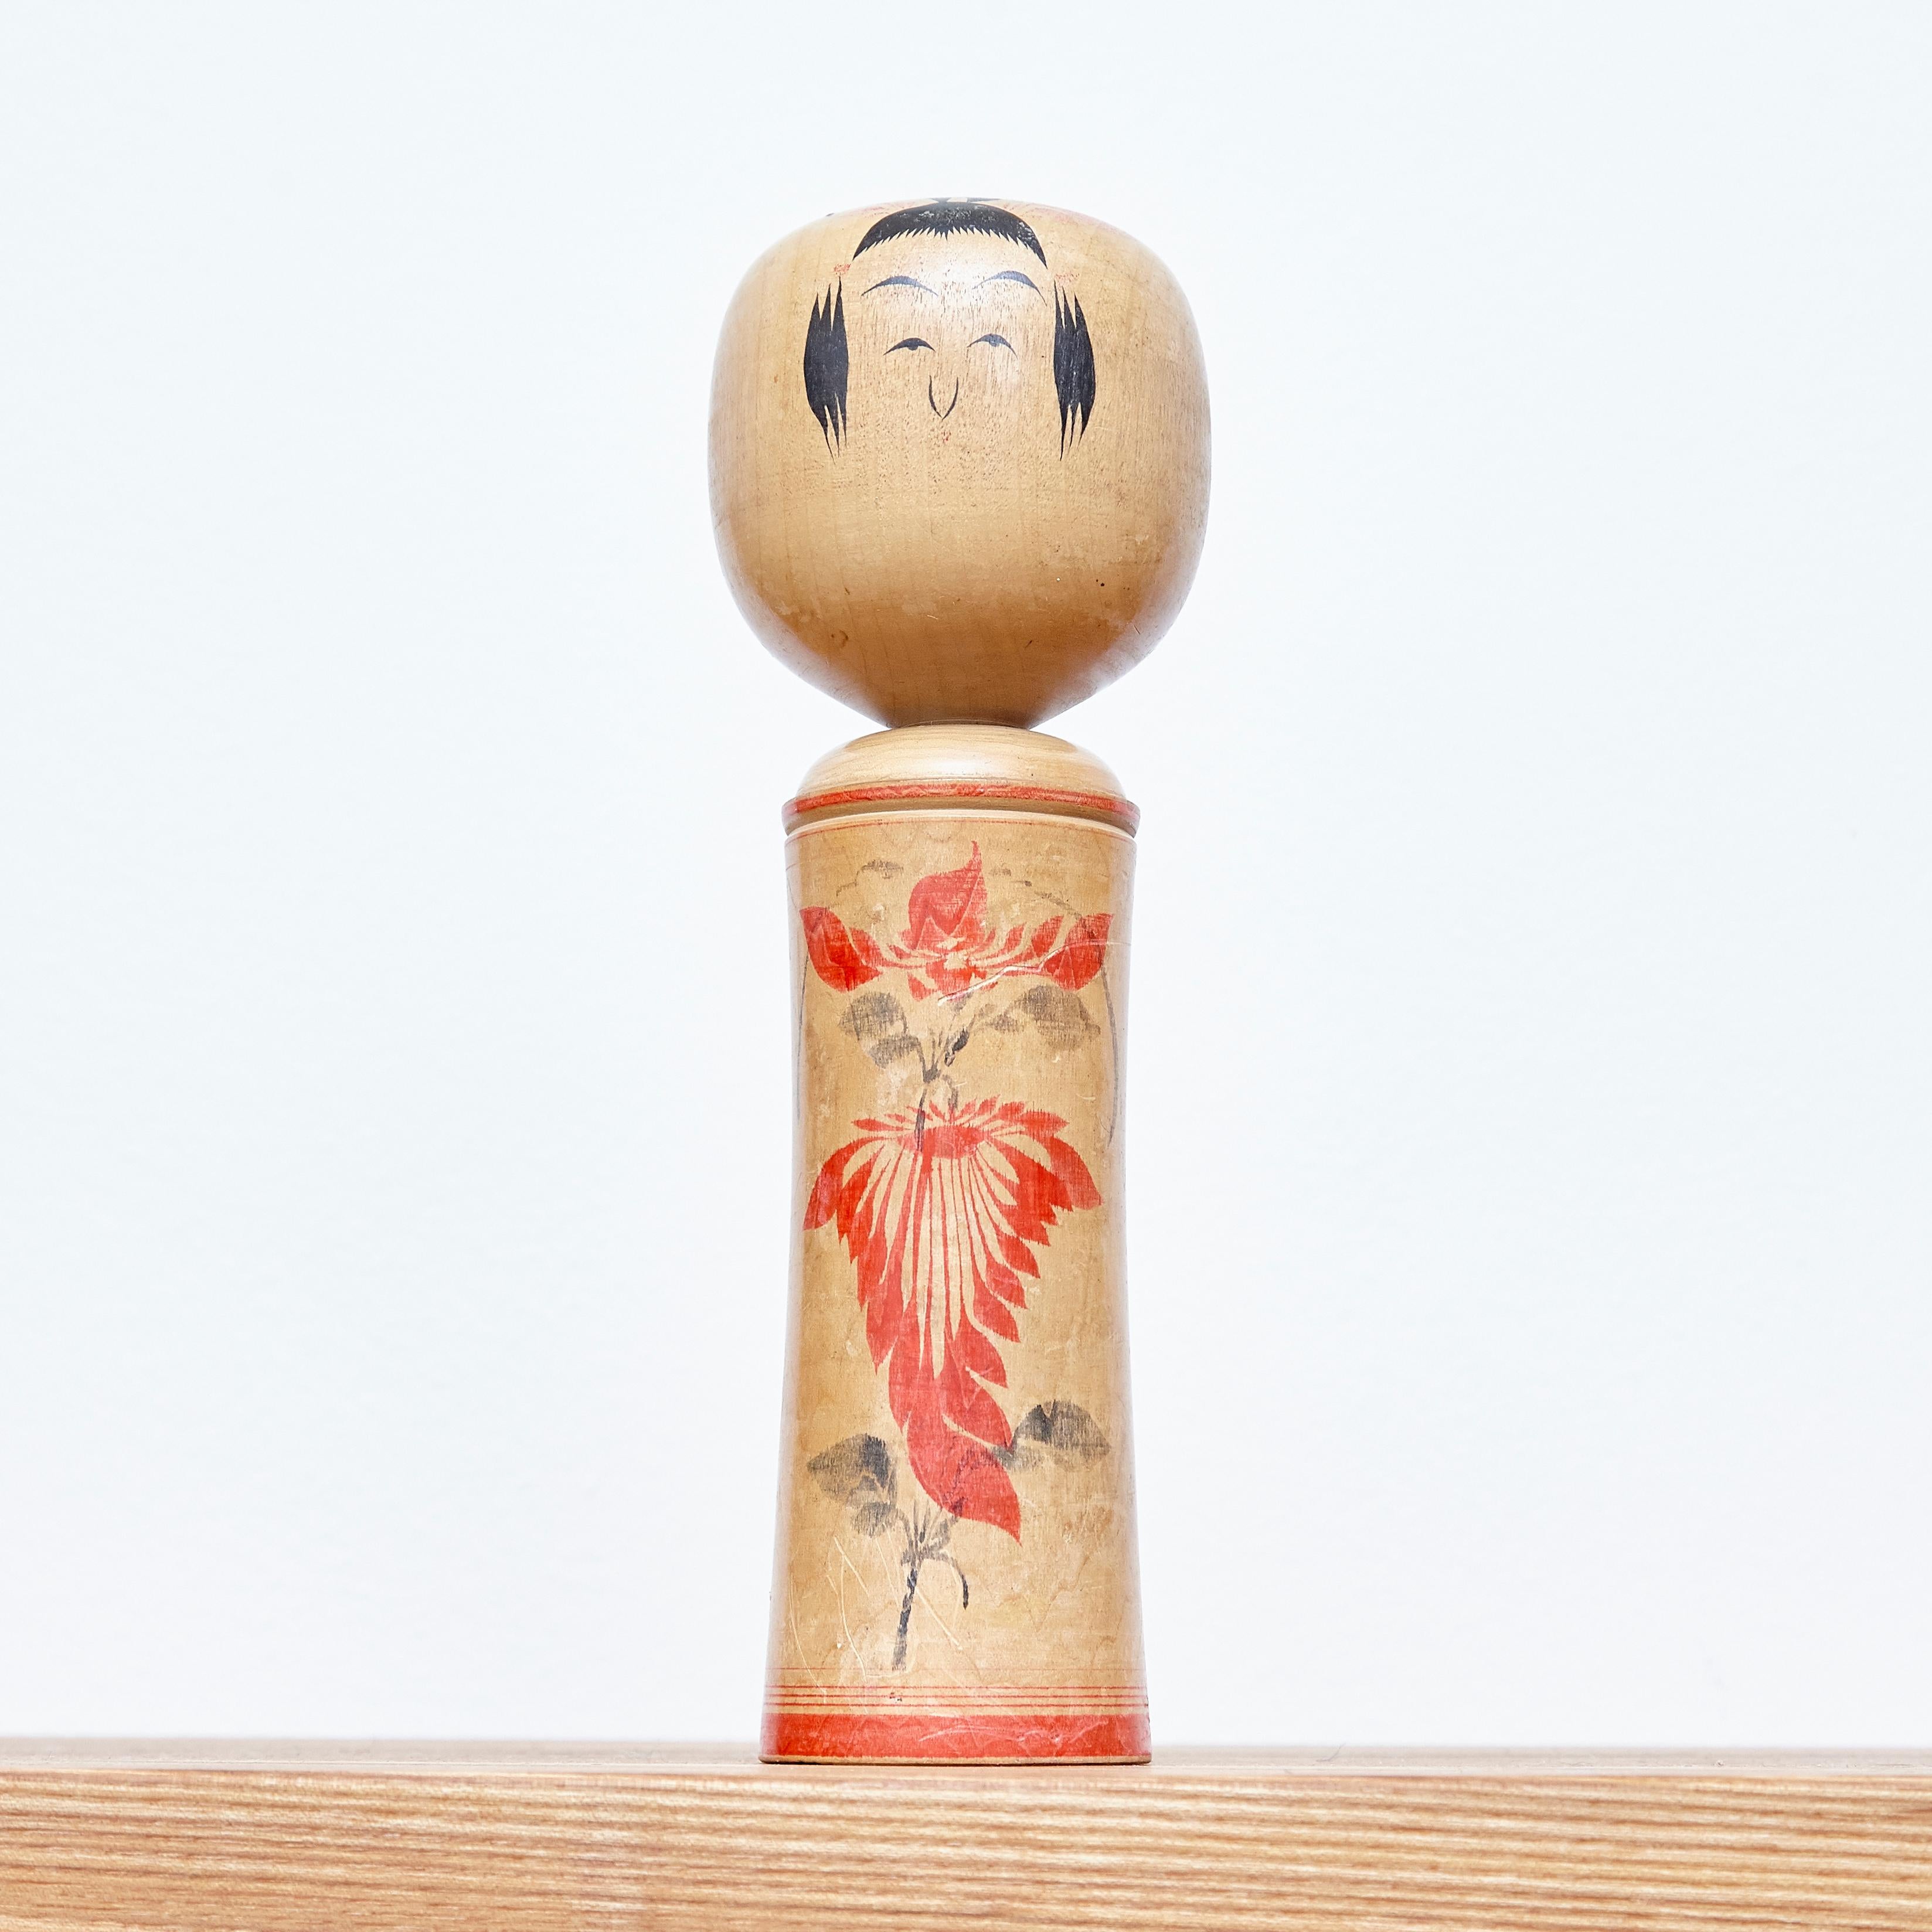 Japanese doll called Kokeshi of the late 20th century.
Provenance from the northern Japan.
Dolls shapes and patterns are particular to a certain area and are classified under 11 types.

Handmade by Japanese artisans from wood. Have a simple